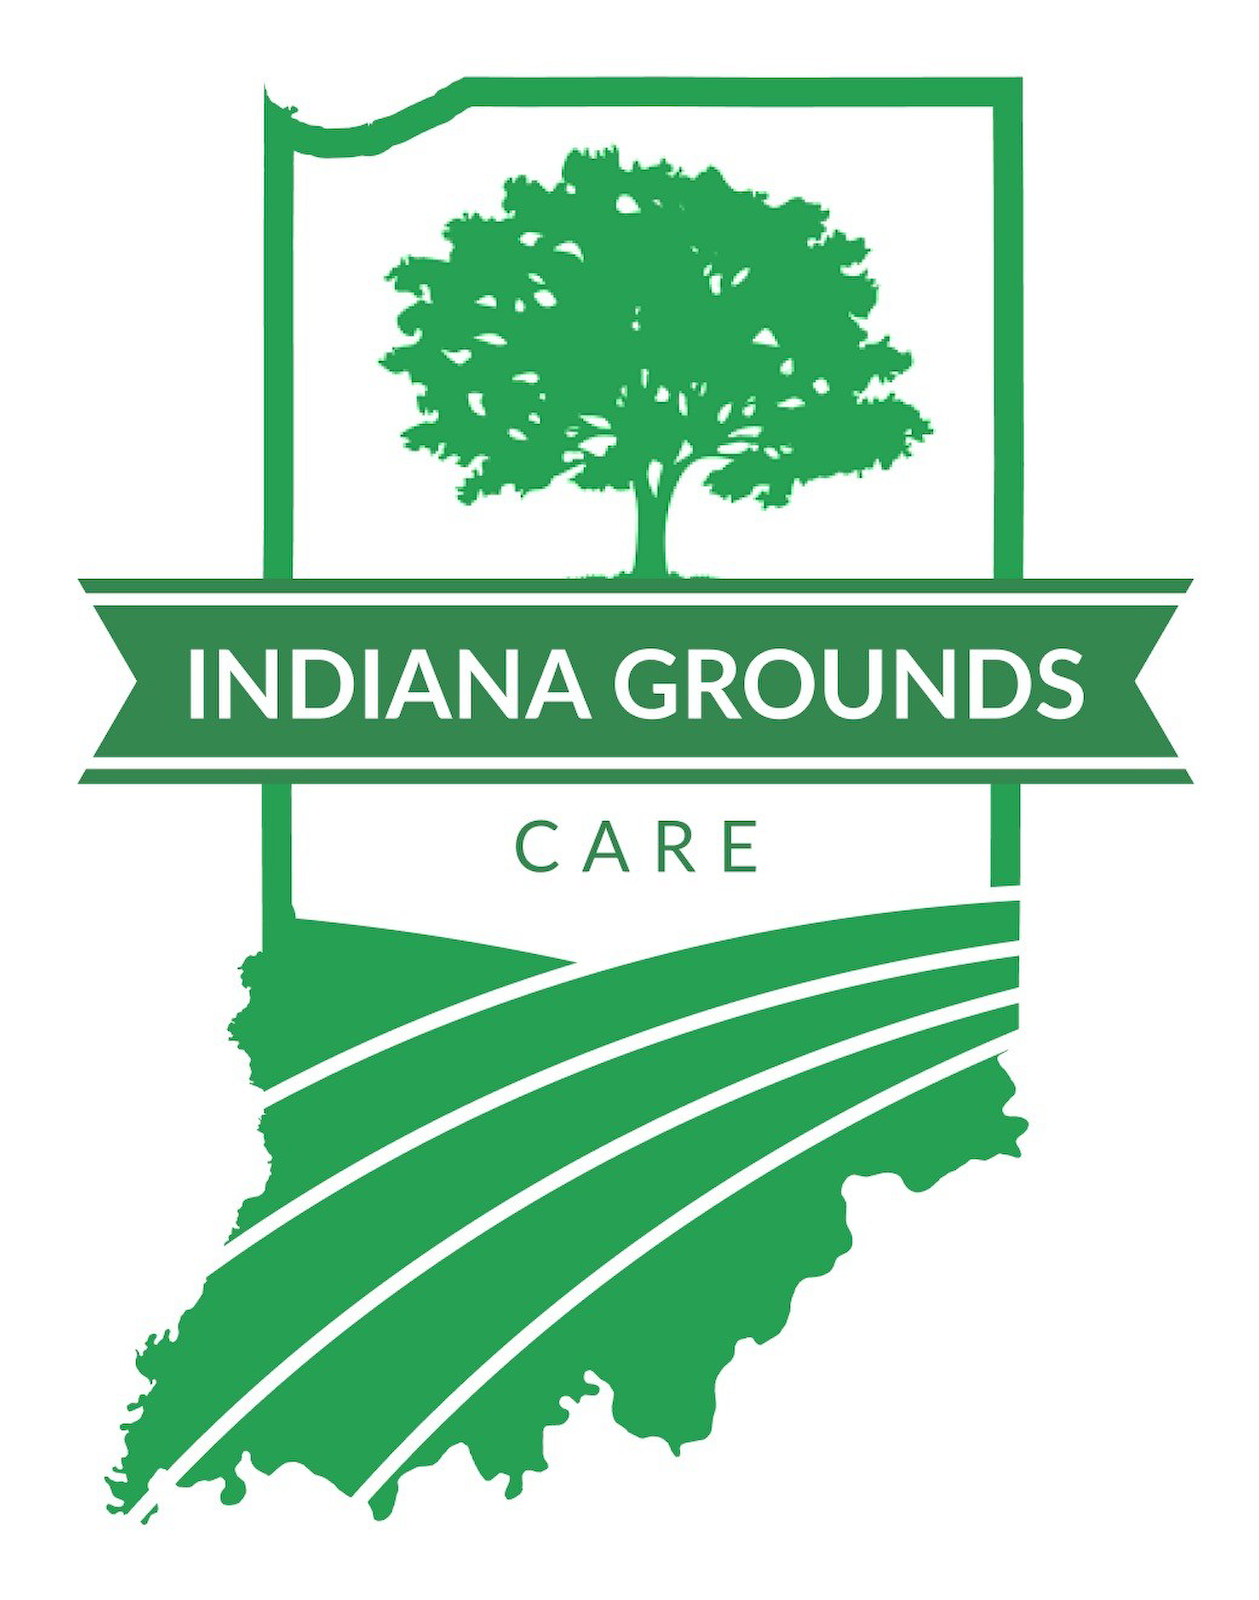 Indiana Grounds Care